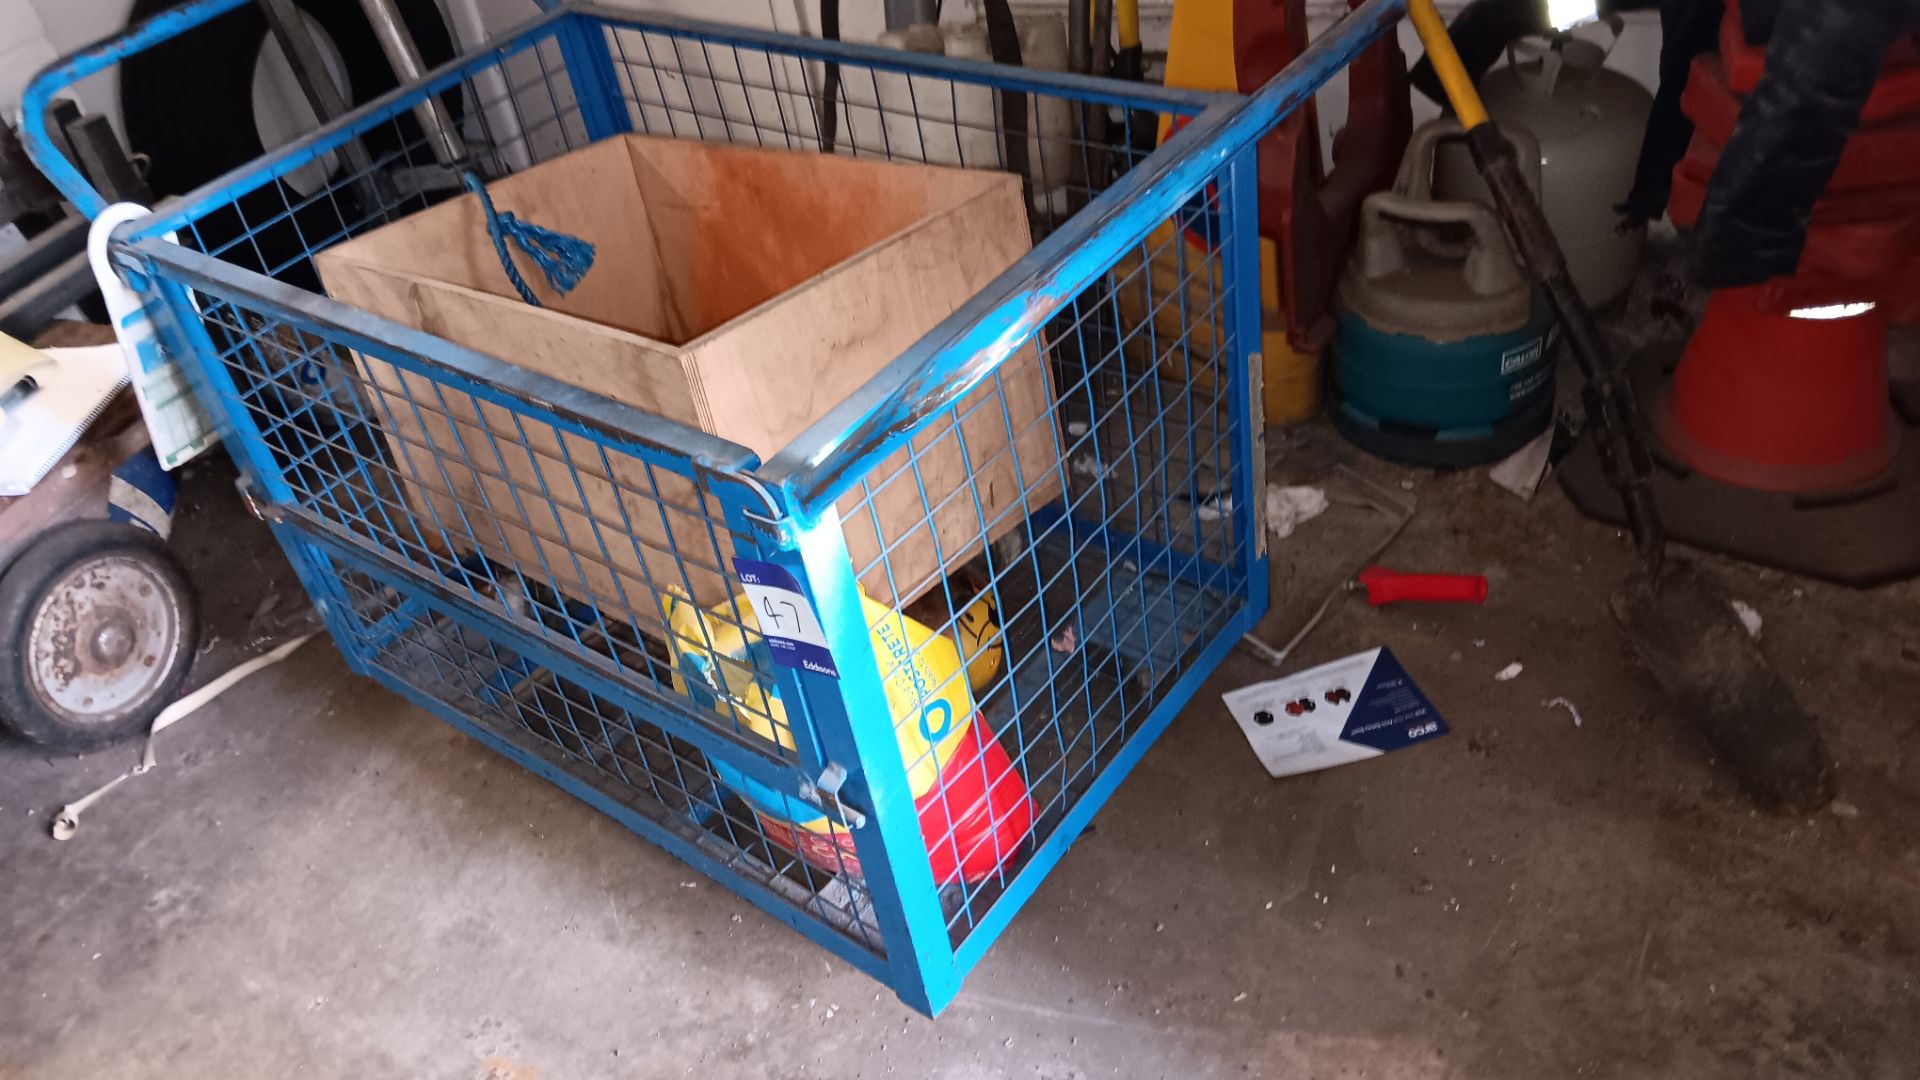 Multi purpose platform truck with mesh sides and homemade wooden box trolley – Located in Unit 3 - Image 2 of 3